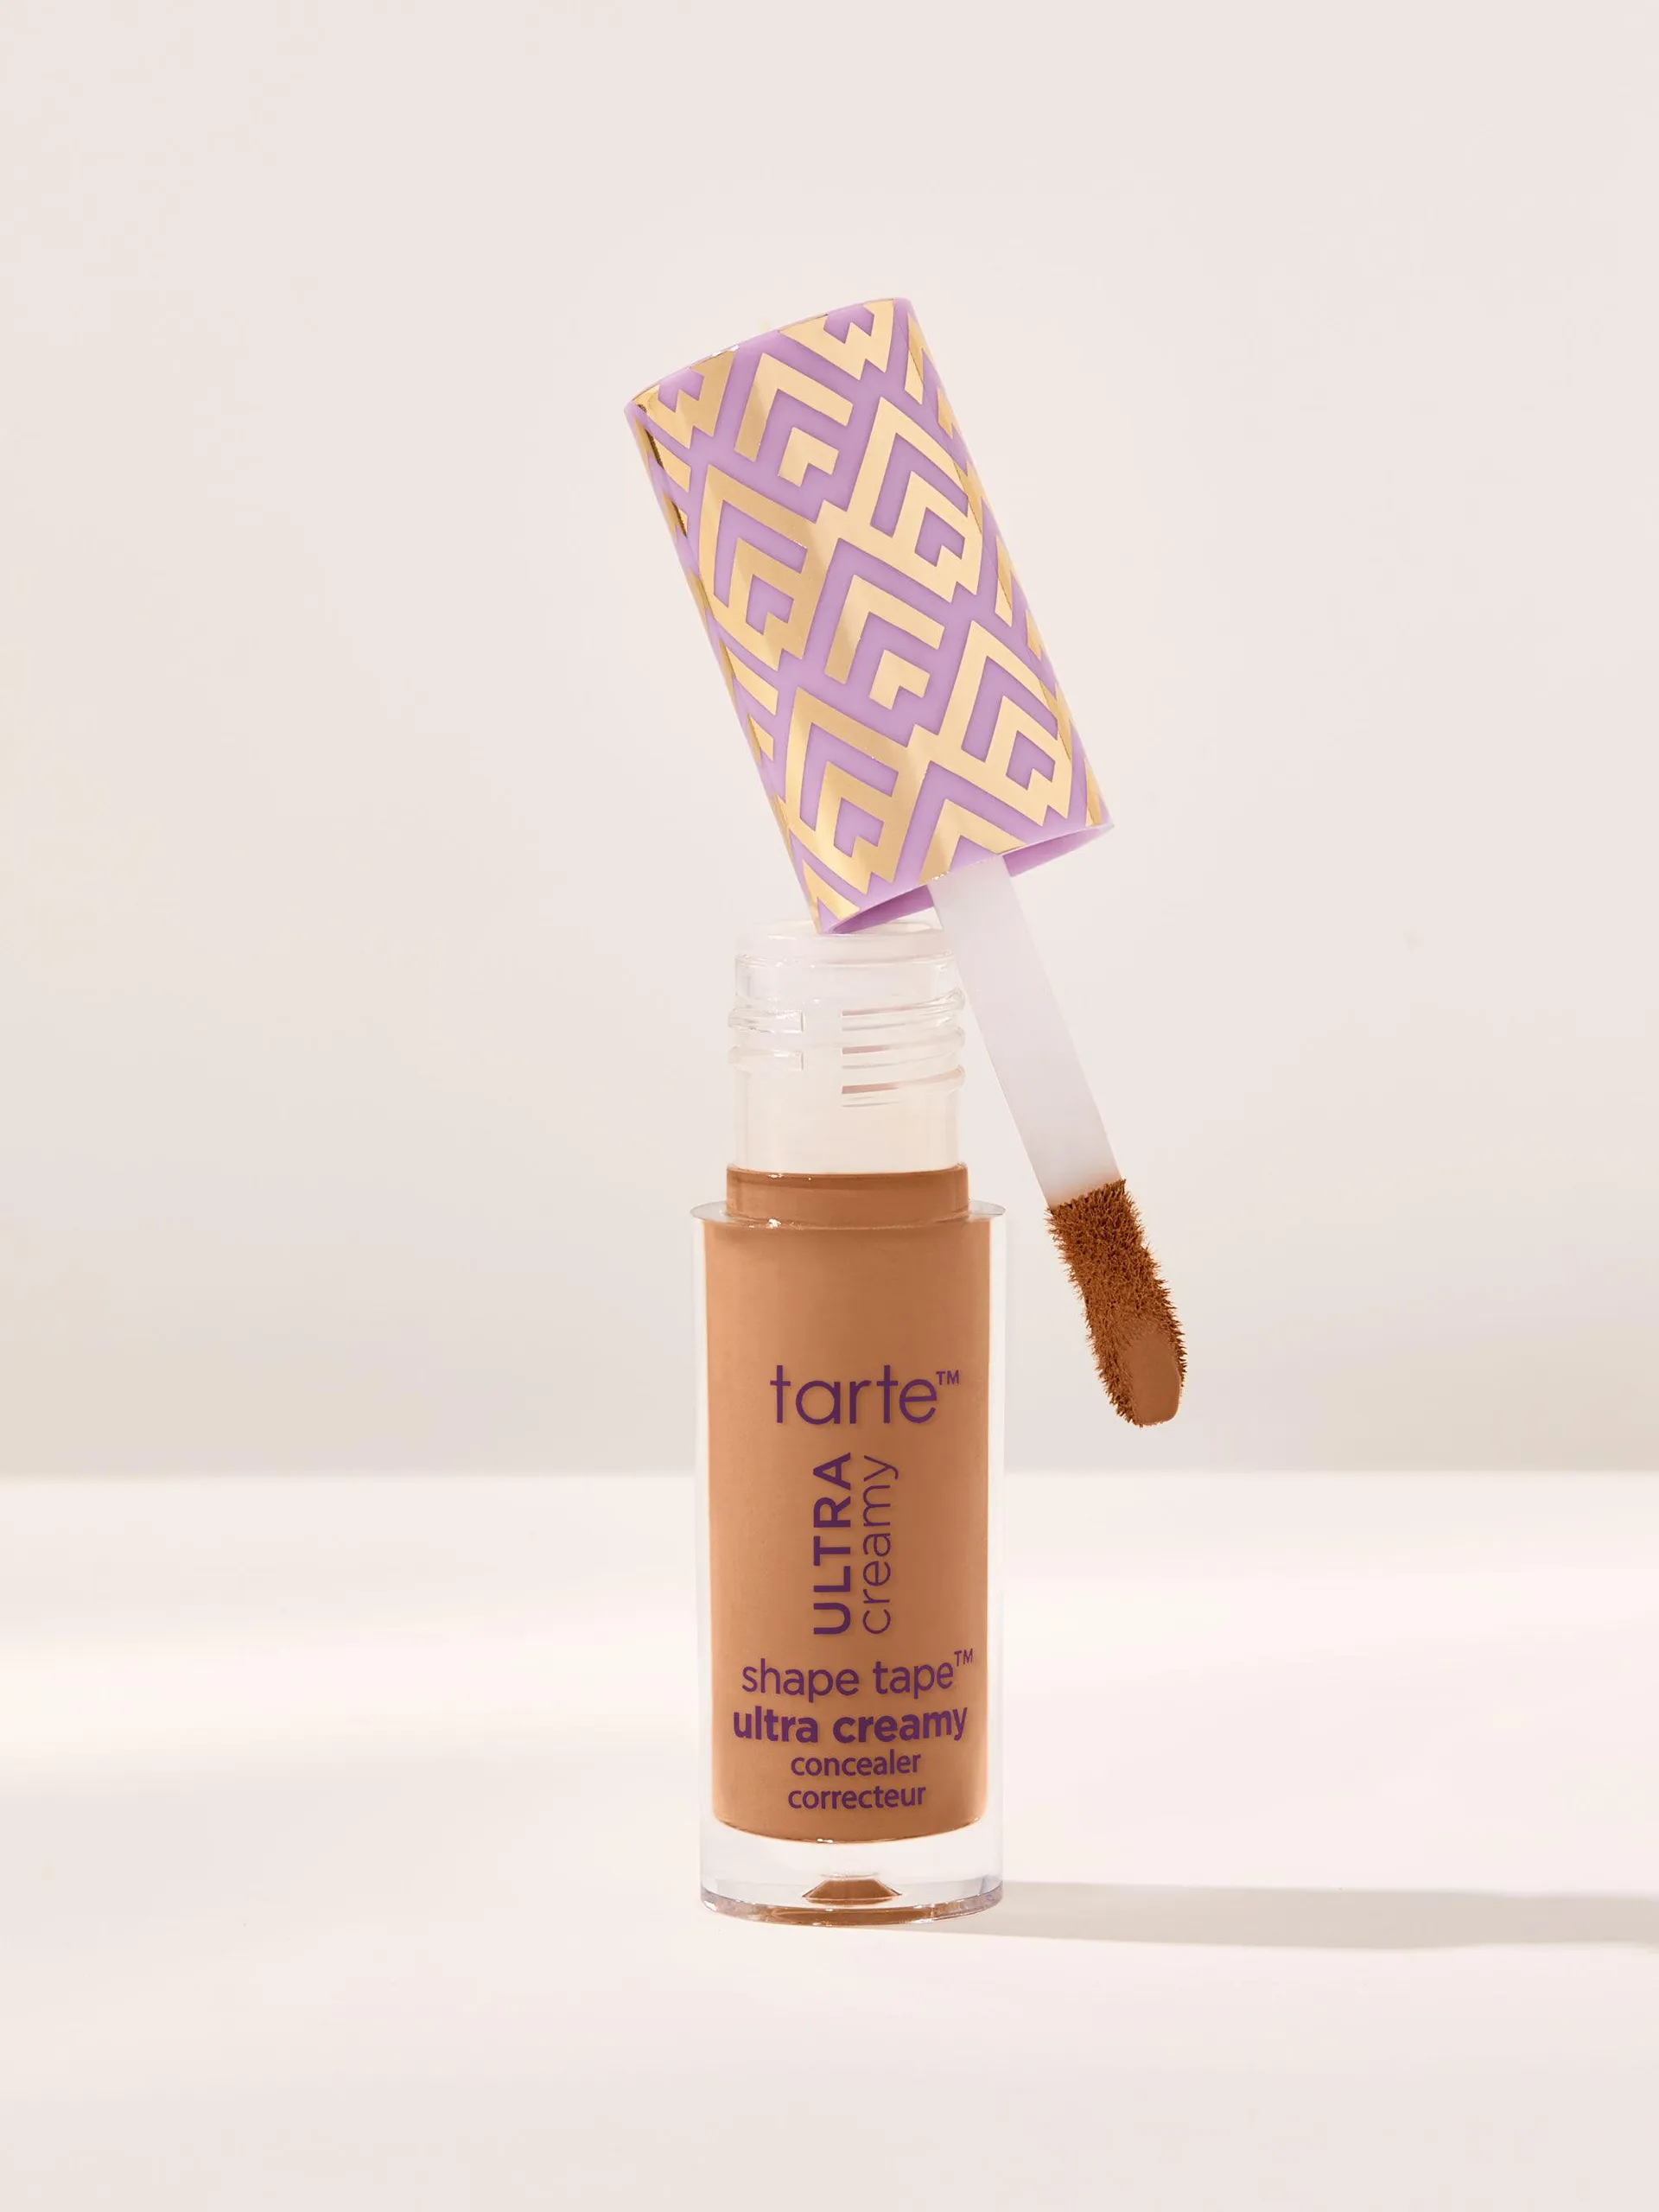 travel-size shape tape™ ultra creamy concealer